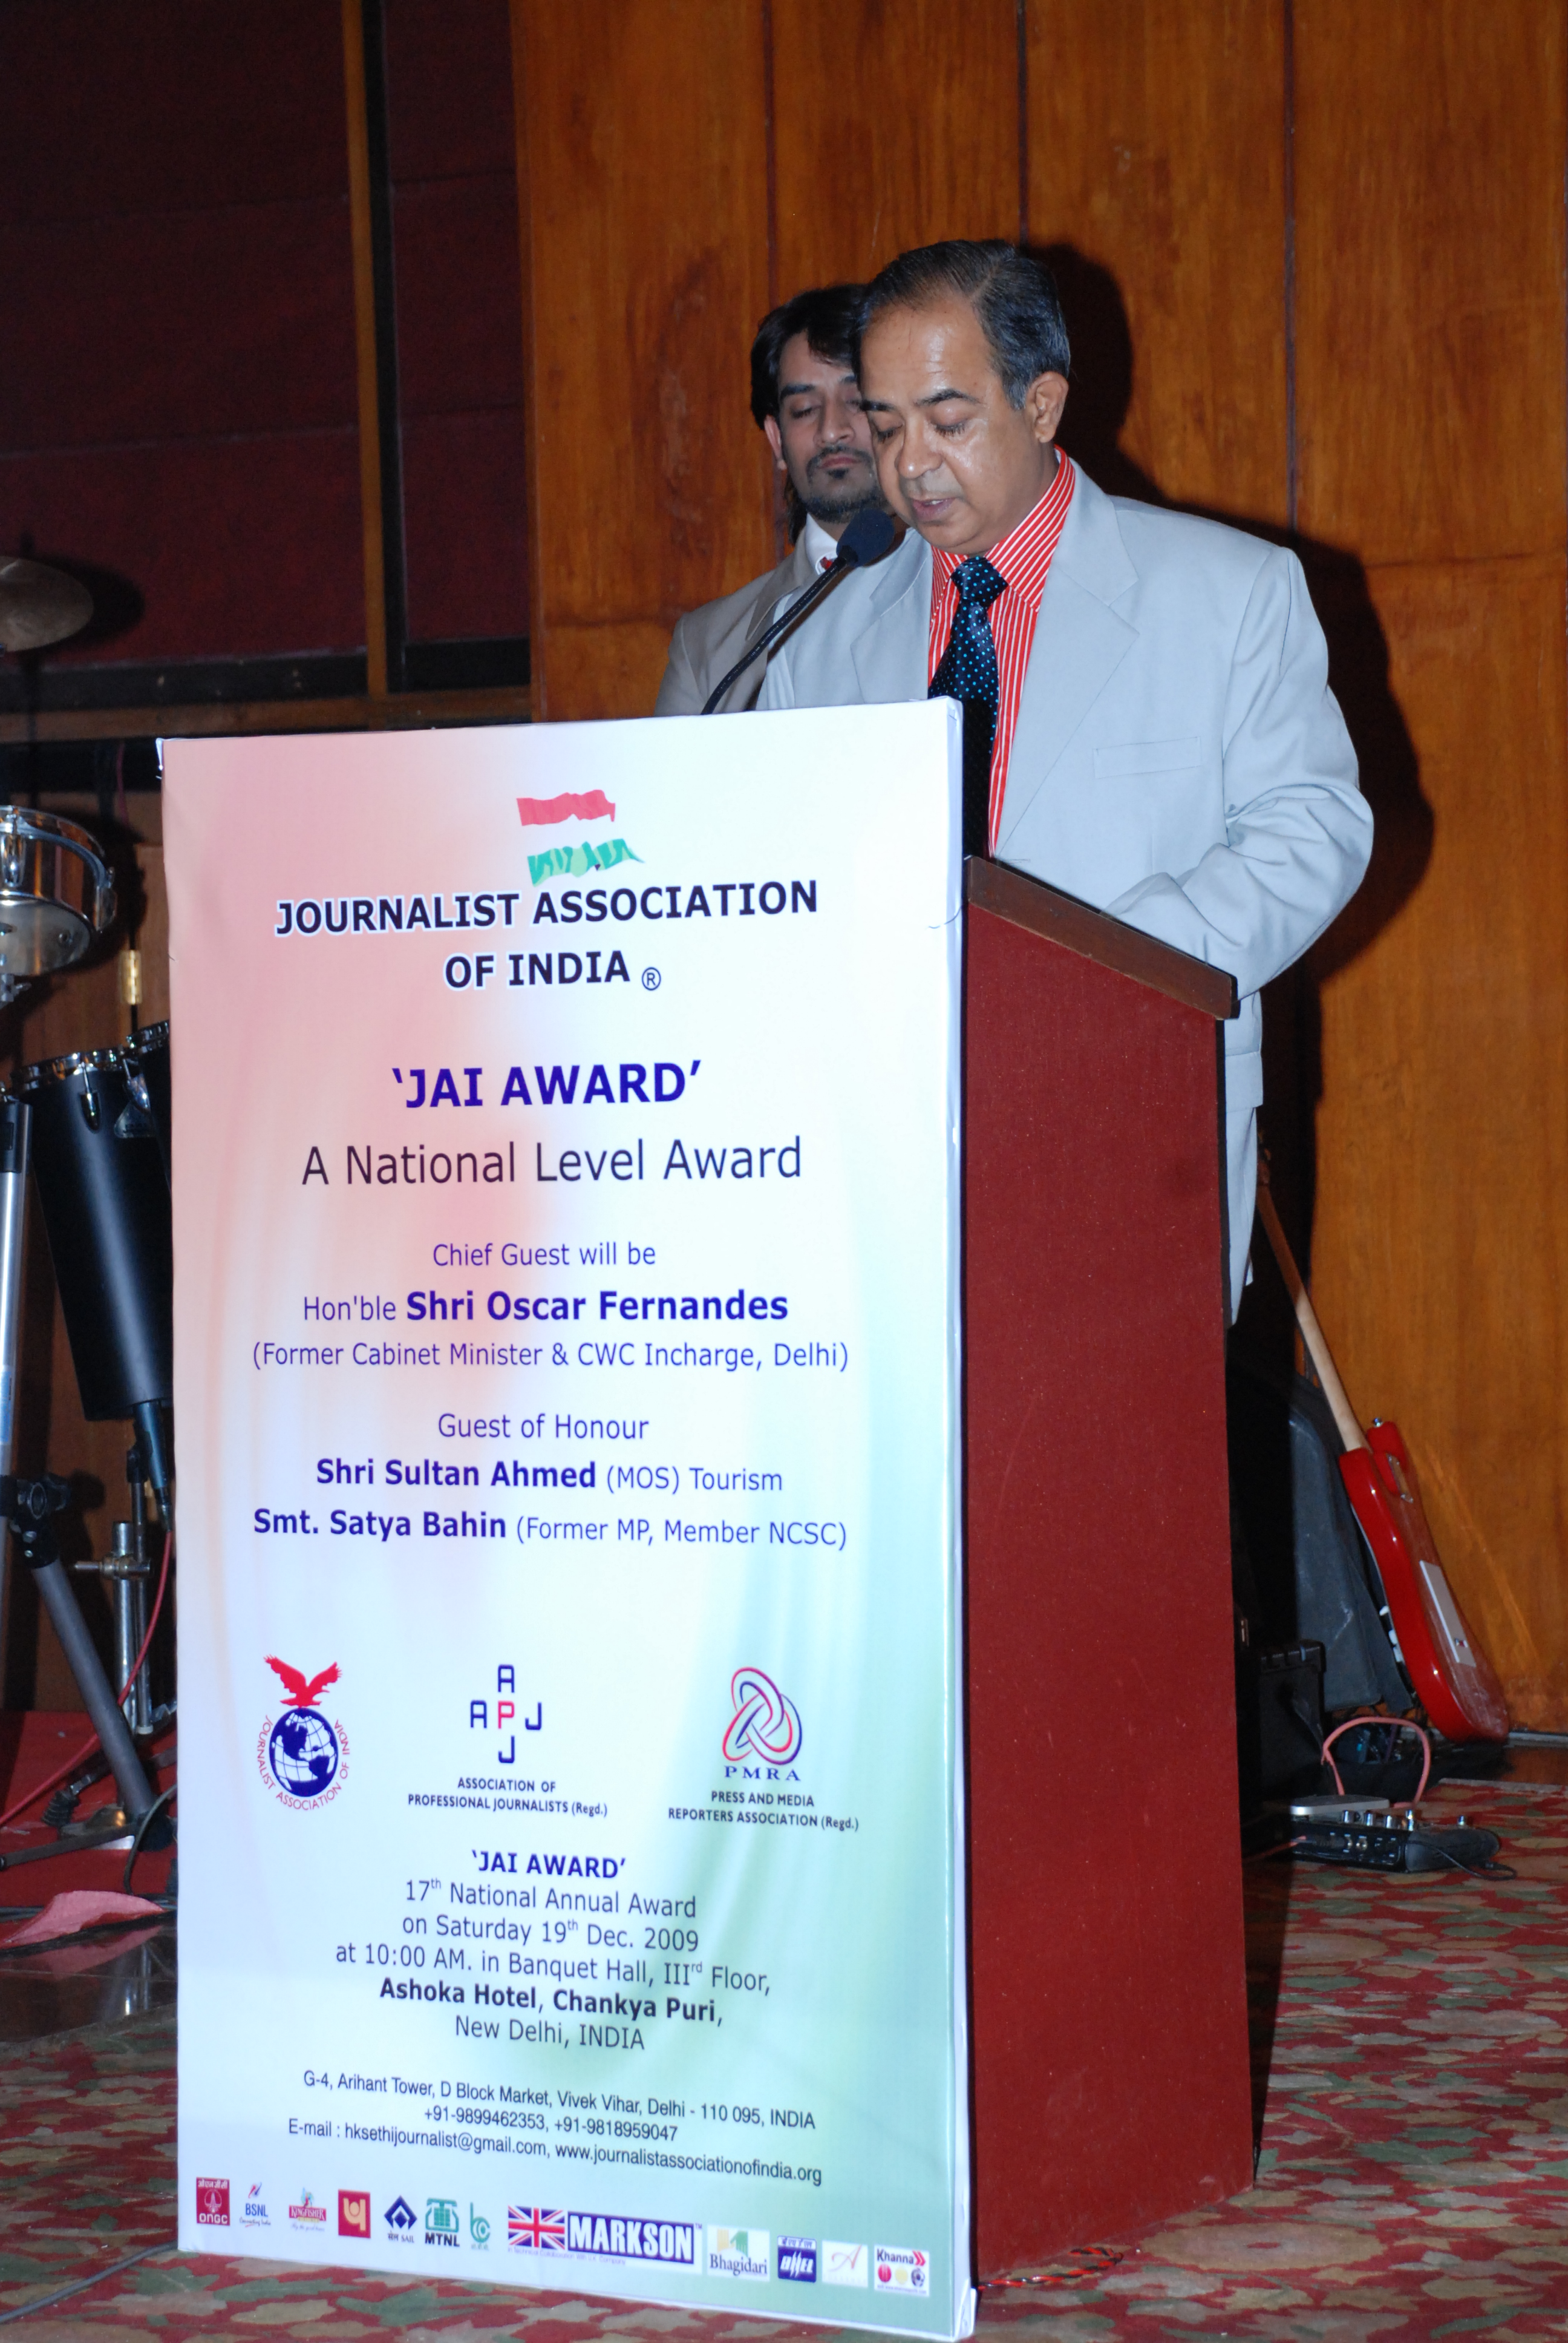  Journalist Association of India announced about their Annual Awards